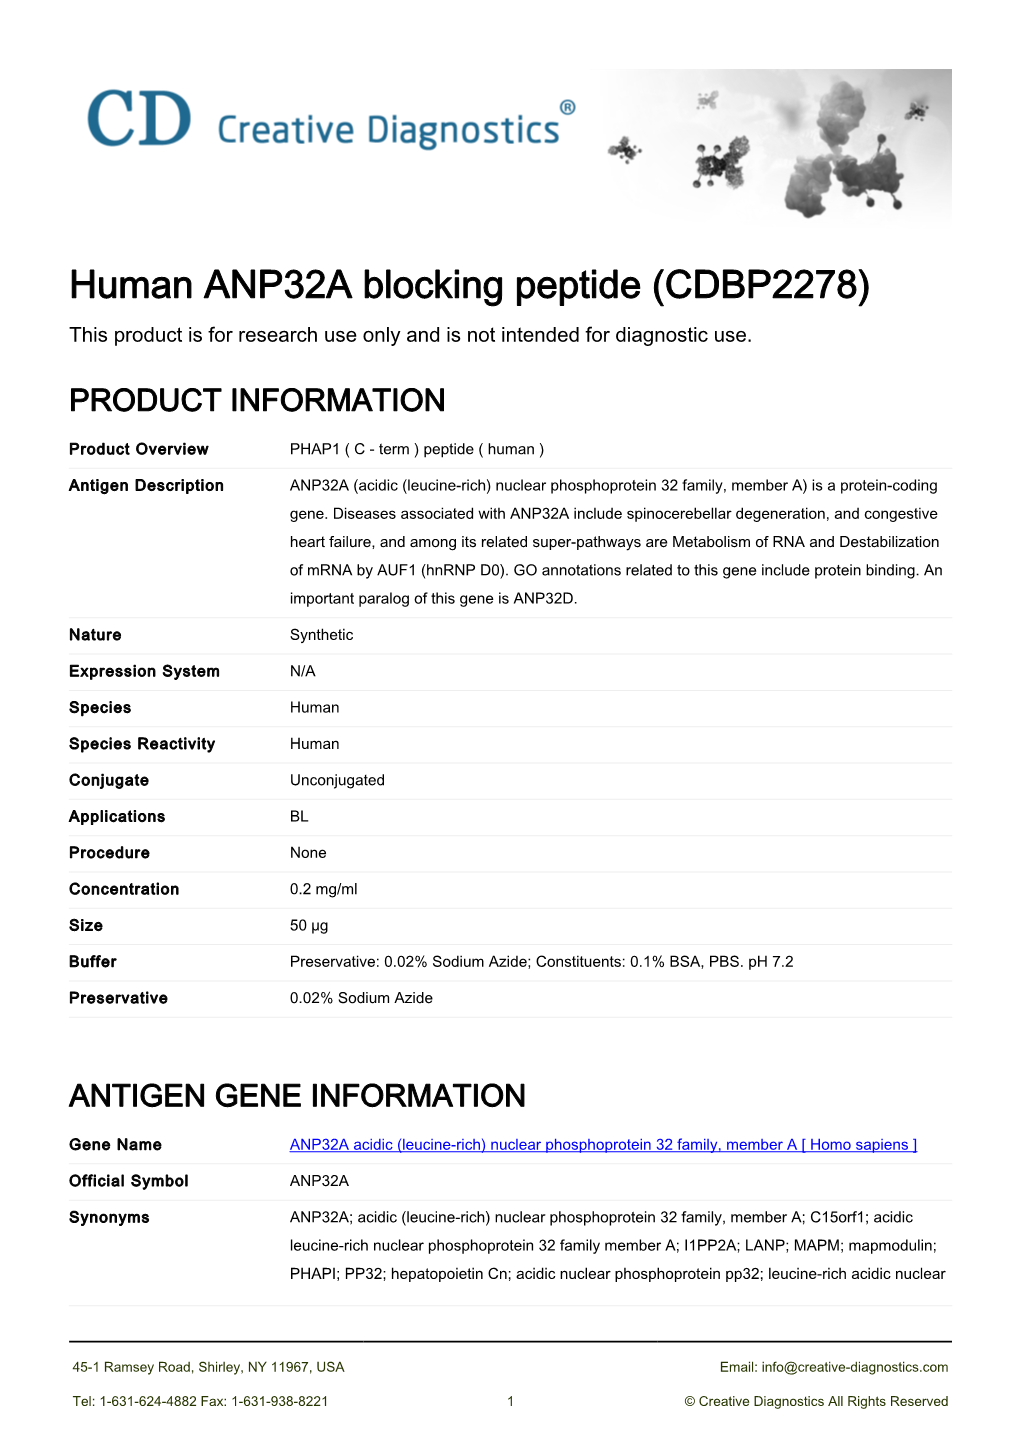 Human ANP32A Blocking Peptide (CDBP2278) This Product Is for Research Use Only and Is Not Intended for Diagnostic Use